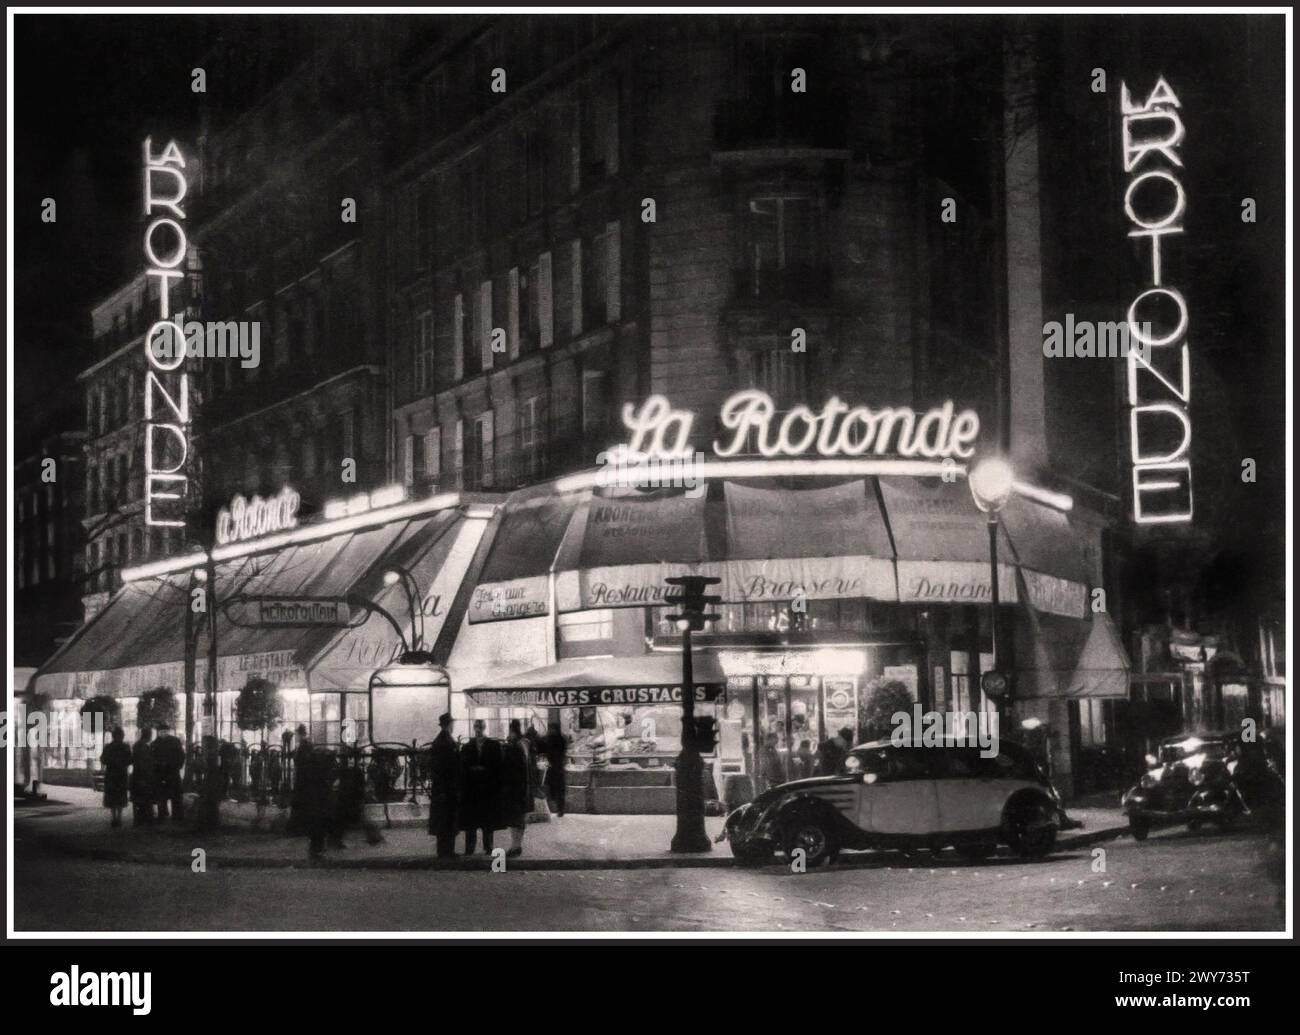 1920s Paris Vintage Retro Famous Cafe Restaurant 'LA ROTONDE' Brasserie Dancing Paris France. La Rotonde opened in 1911, situated directly across the Boulevard du Montparnasse from Le Dôme. During the 1920s, these cafes were at the center of expatriate life in Paris. Montparnasse was filled with cafes where artists could exchange ideas and and linger a table well into the night for a few centimes. Montparnasse Paris France Stock Photo